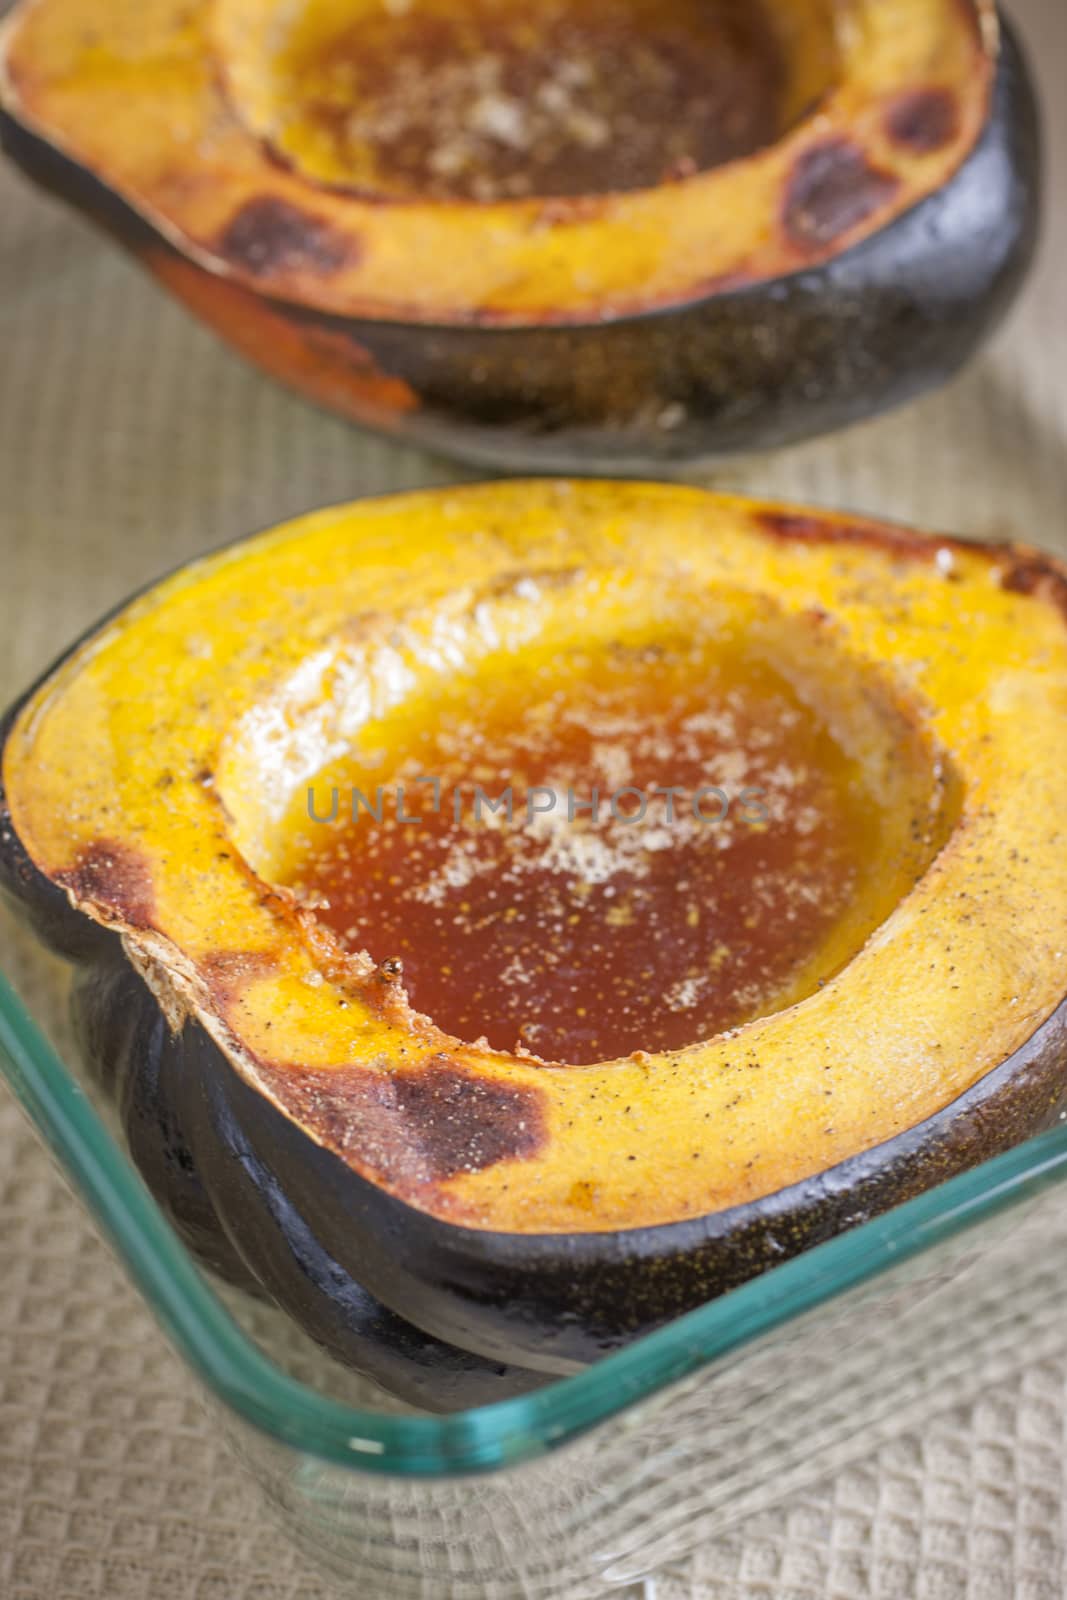 Baked Acorn Squash by SouthernLightStudios